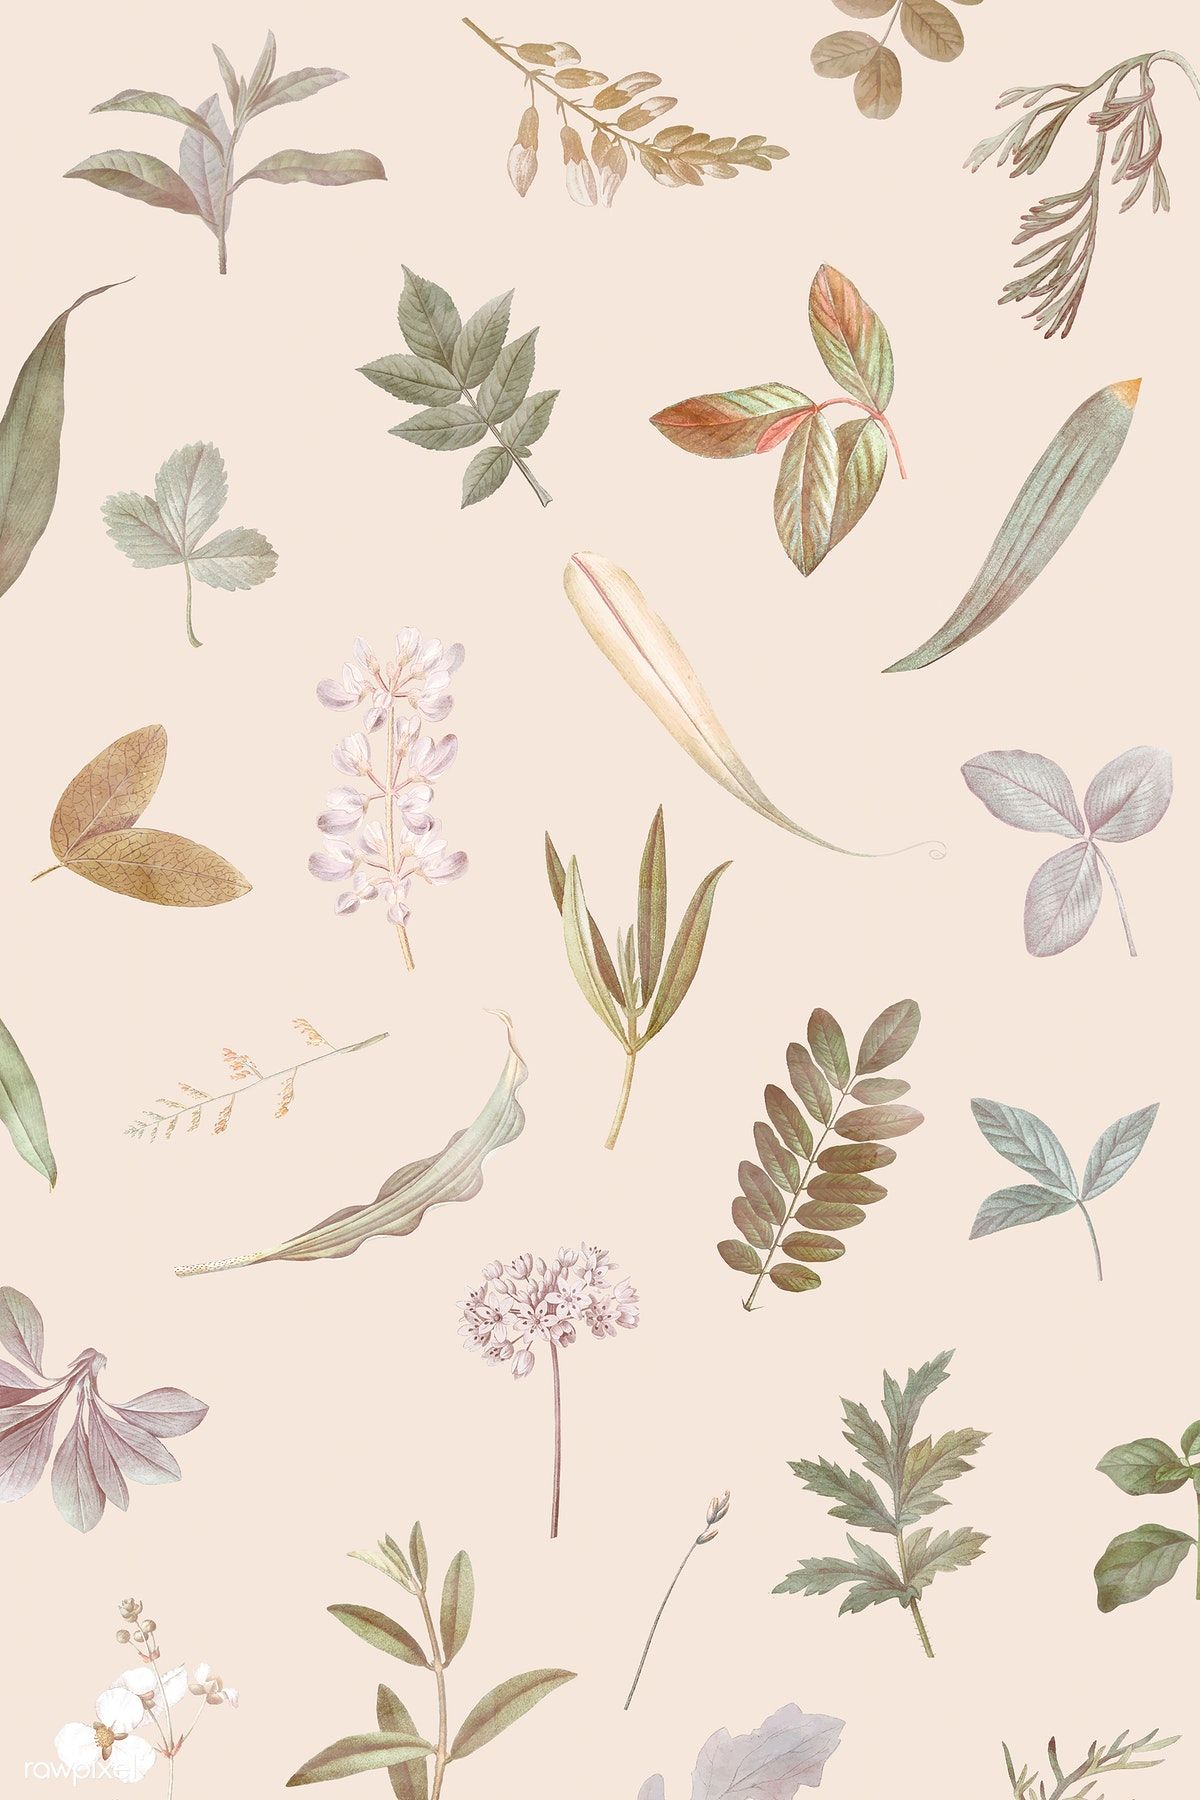 Download premium vector of Foliage pattern on beige background vector by Sasi about dried flower, autumn, Flower phone wallpaper, tropical flower, and flower dr. Beige background, Wallpaper background, Flower phone wallpaper